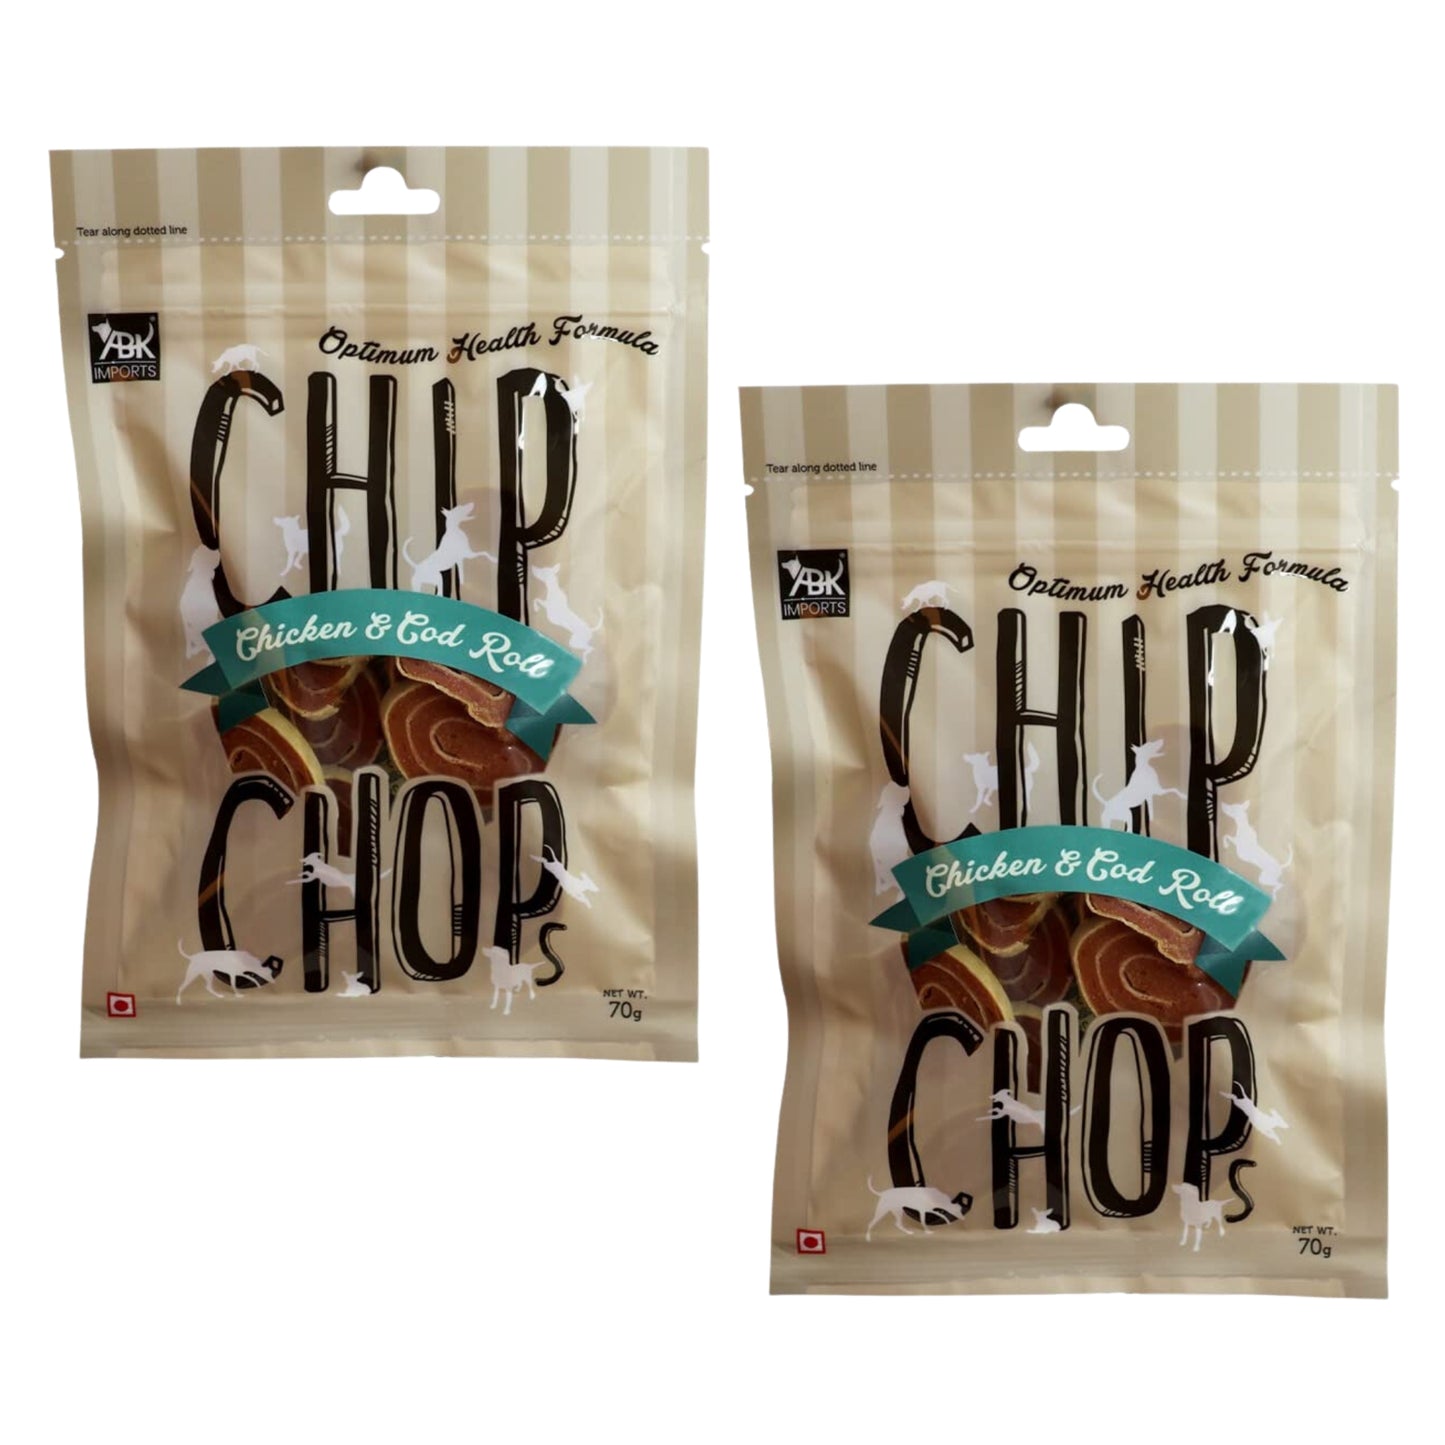 Chip Chops Dog Treats - Chicken & Codfish Roll (70gm, Pack of 2)